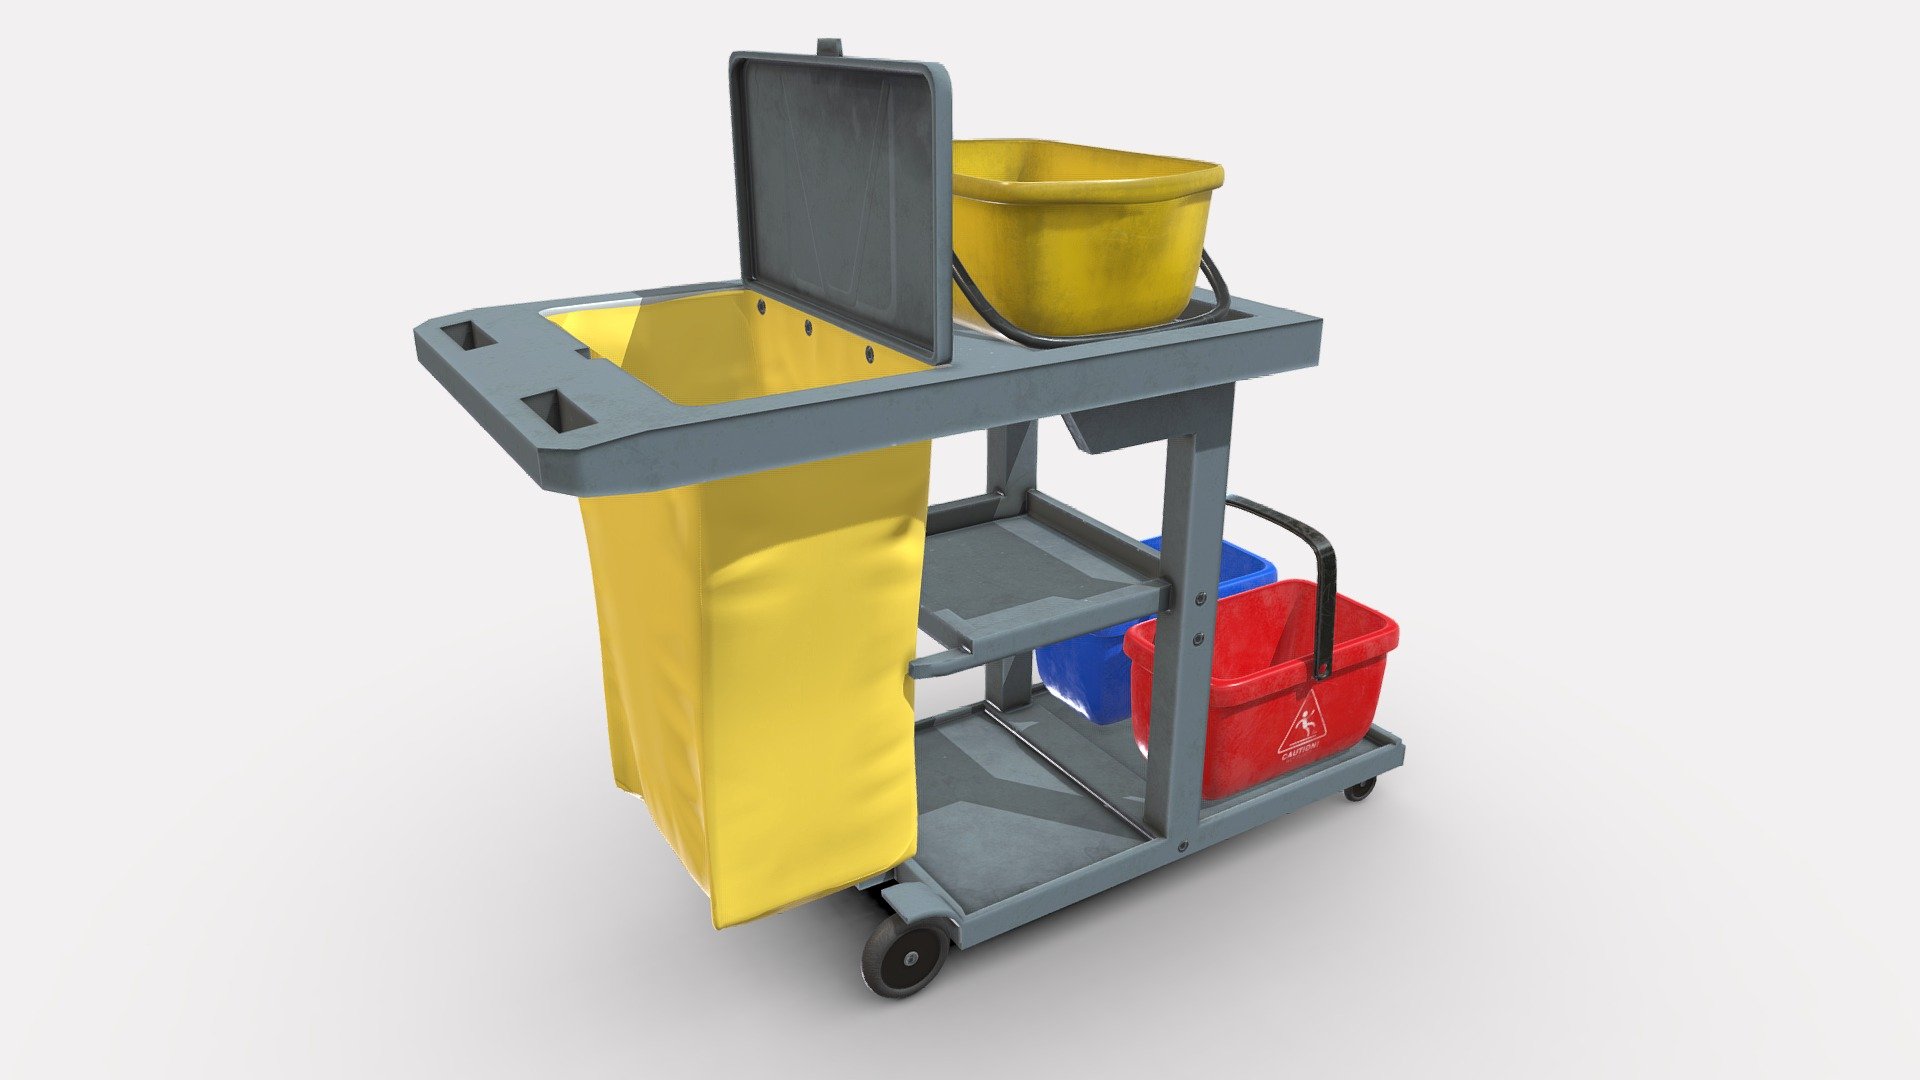 Hospital cleaning trolley with buckets.  Handy prop for any sort of environment. You can move the buckets, change the handle rotation and can also close the bin lid. 

PBR textures @4k 3d model